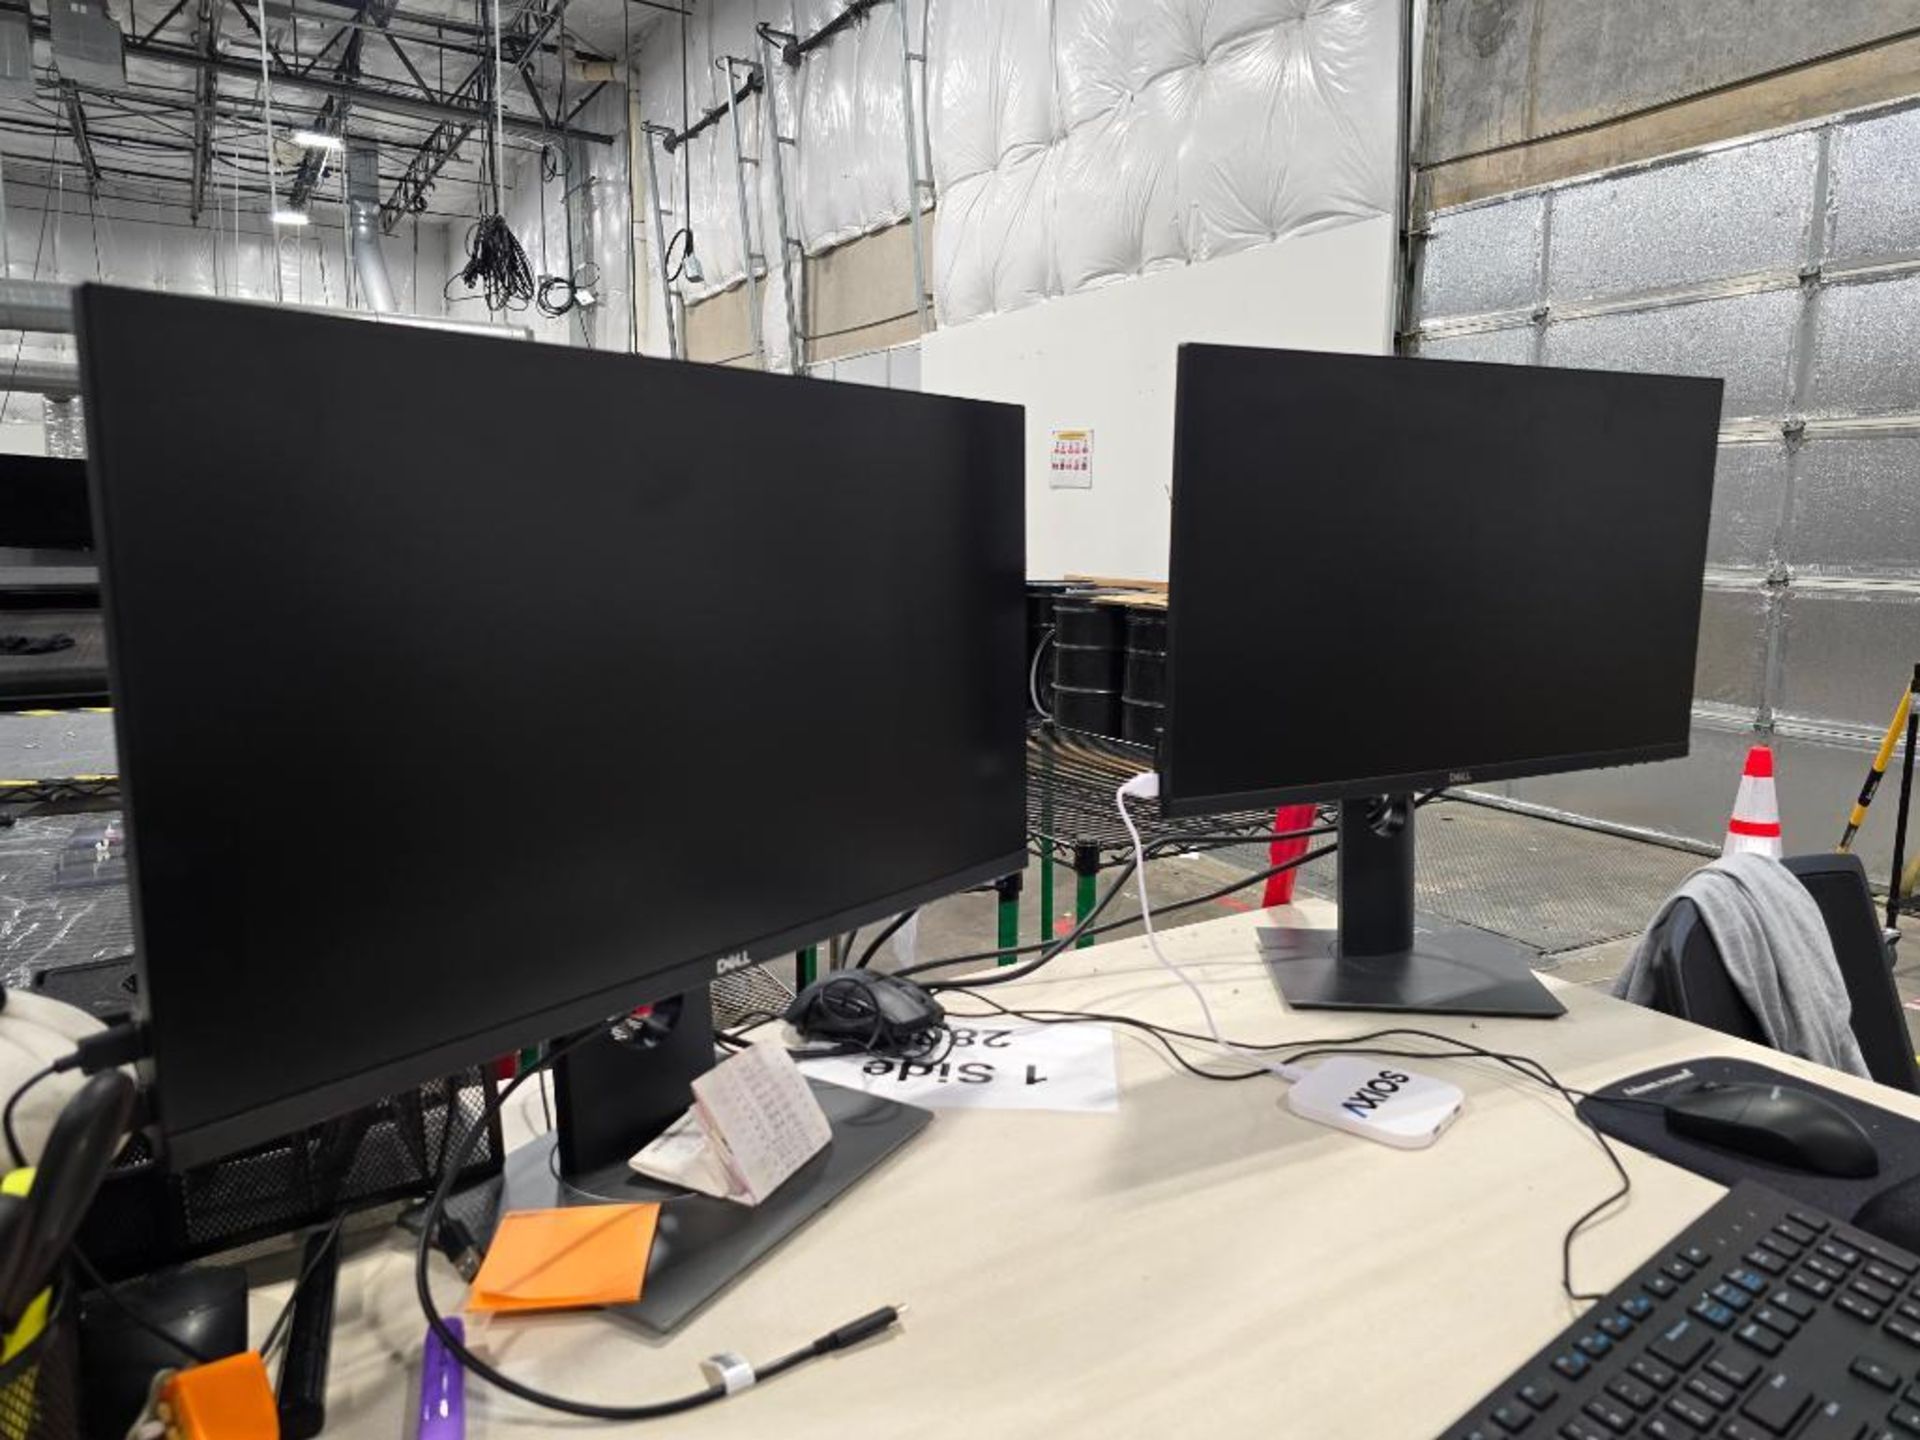 HD Worktable Station, 10' X 30", w/ (4) Monitors (No Printer, Scanners or Mini-PC's) - Image 5 of 7